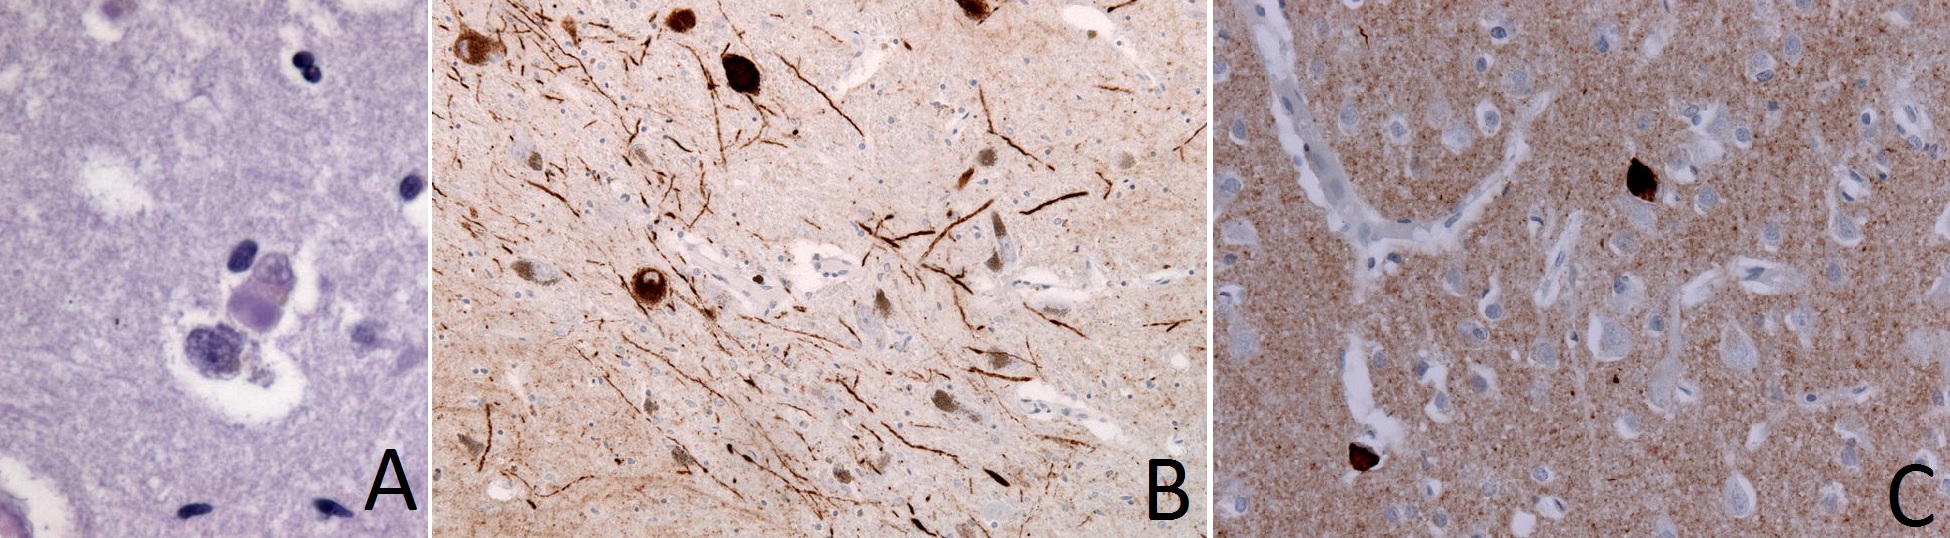 File:Pathology alpha synuclein DLB dementia with lewy bodies autopsy.jpg